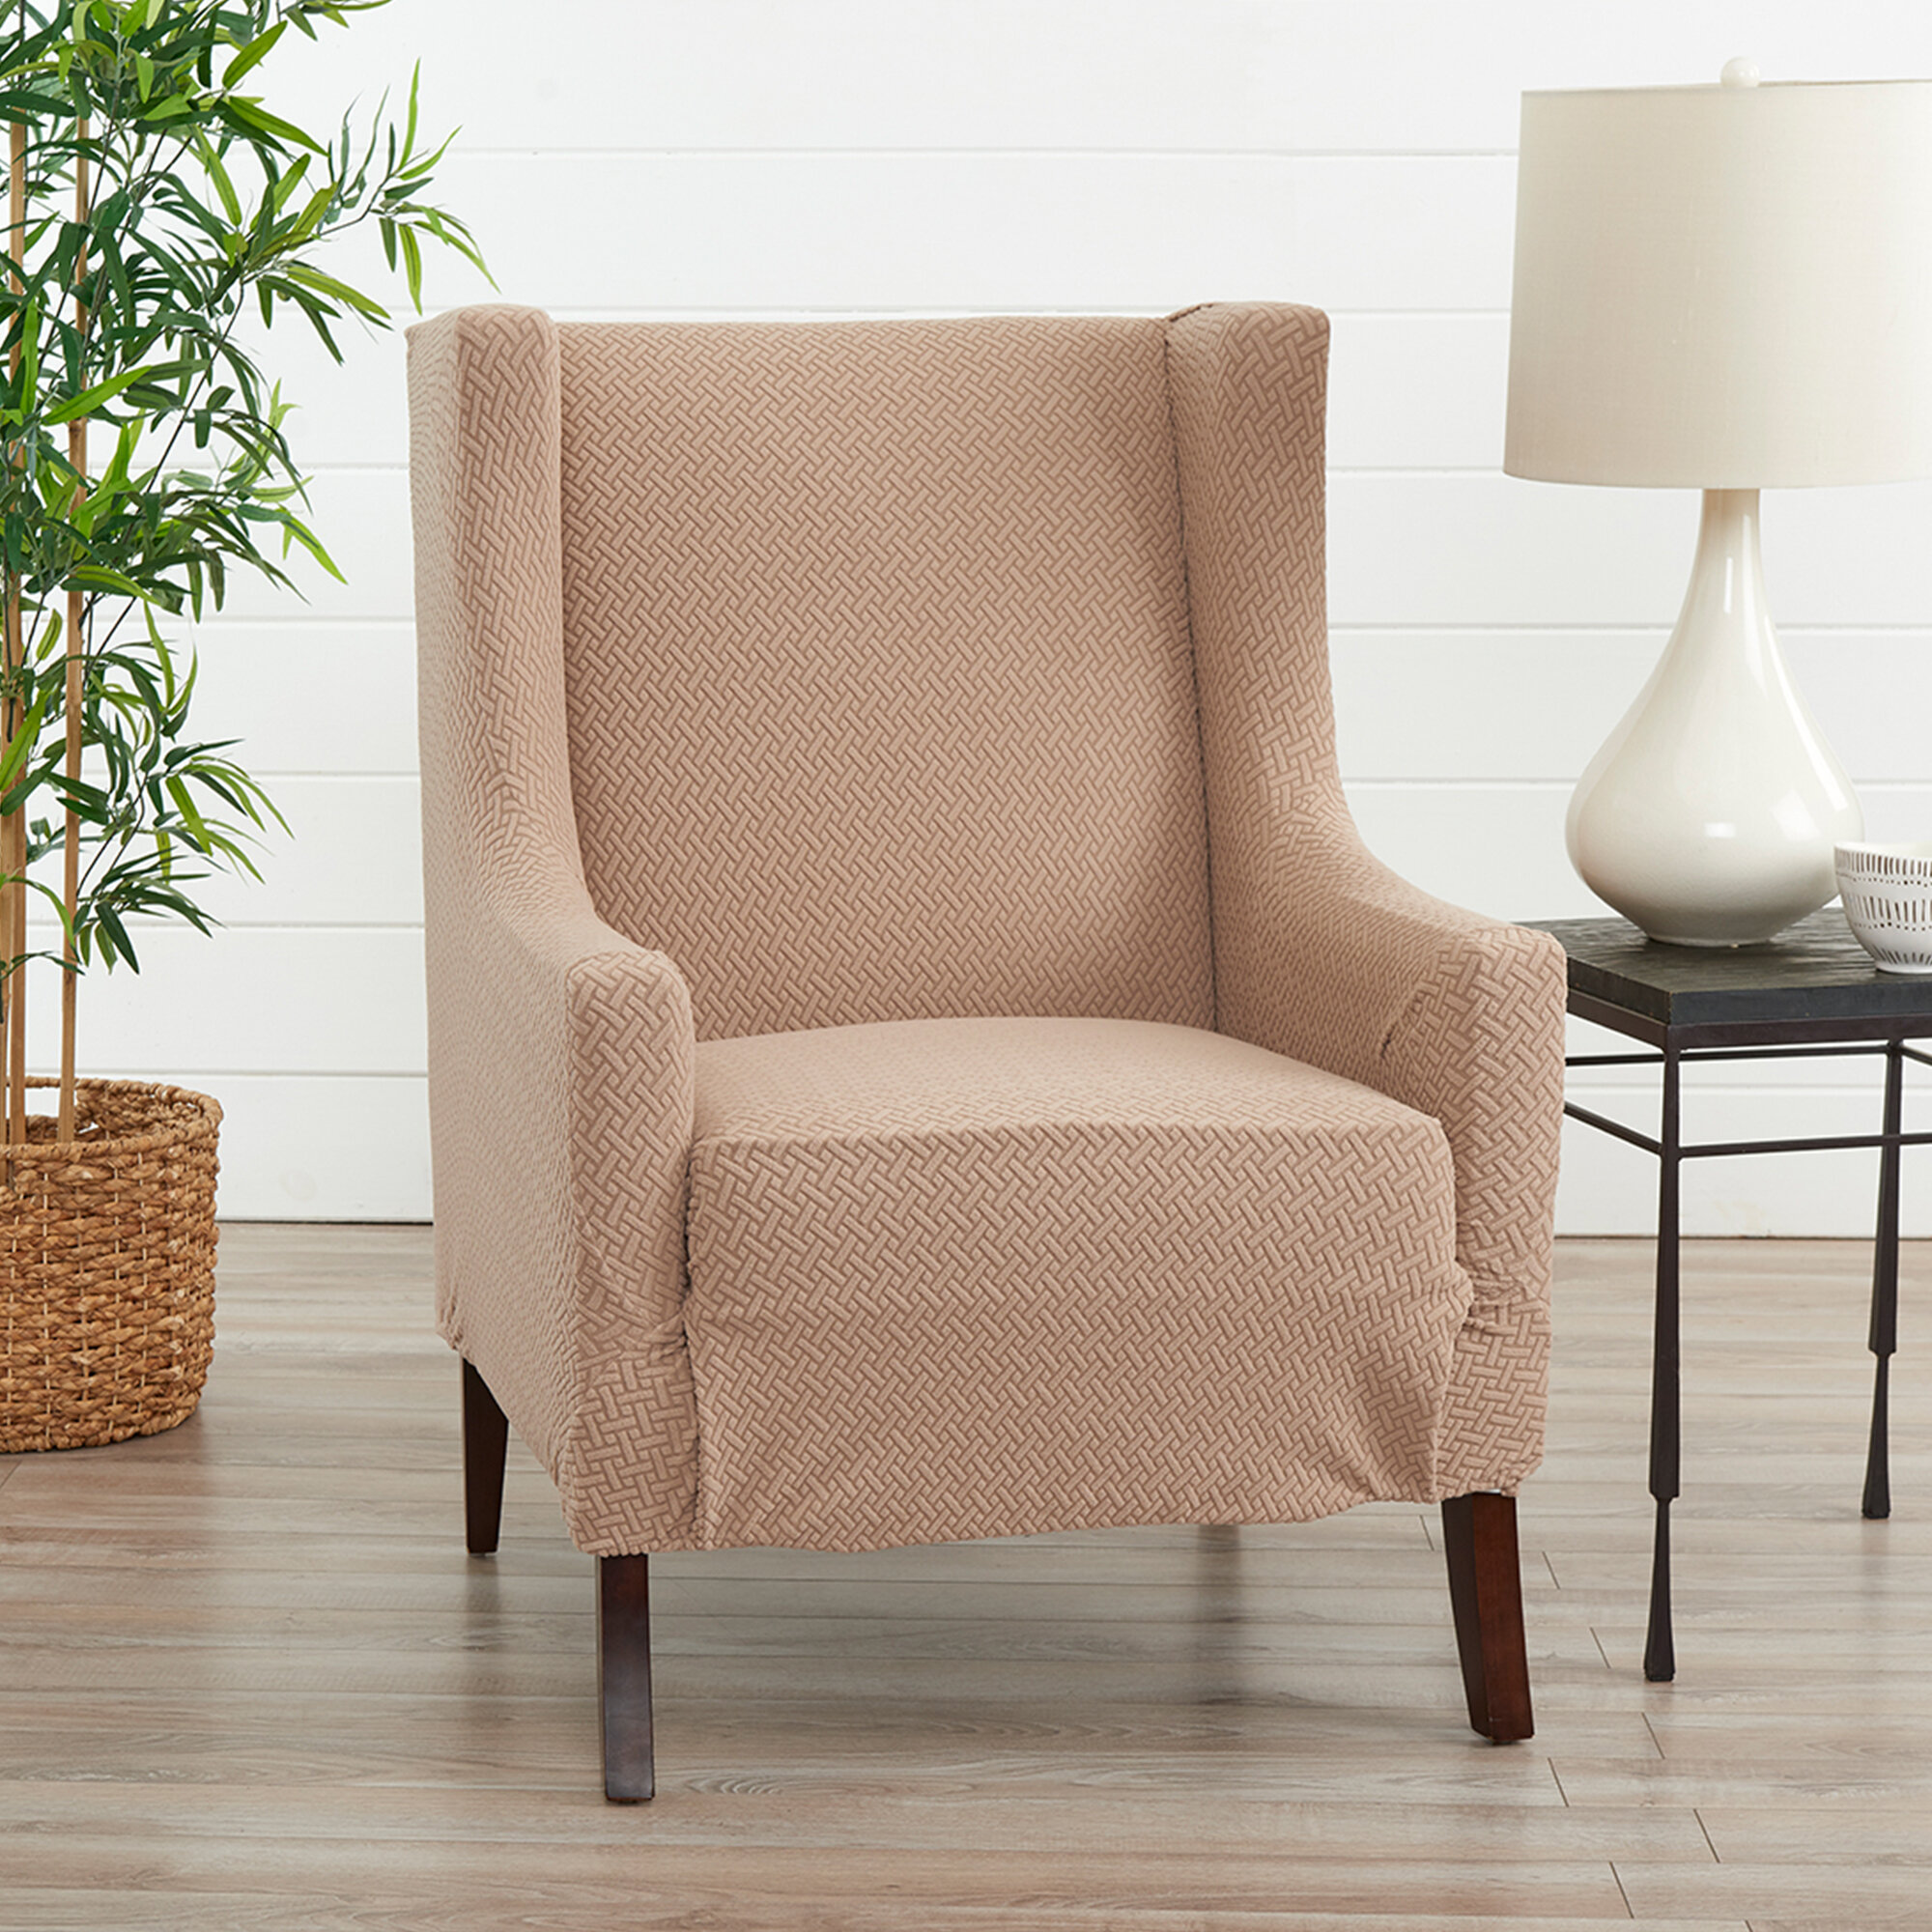 Wing Chair Slipcovers With Separate Cushion Cover : Wing Chair Beige